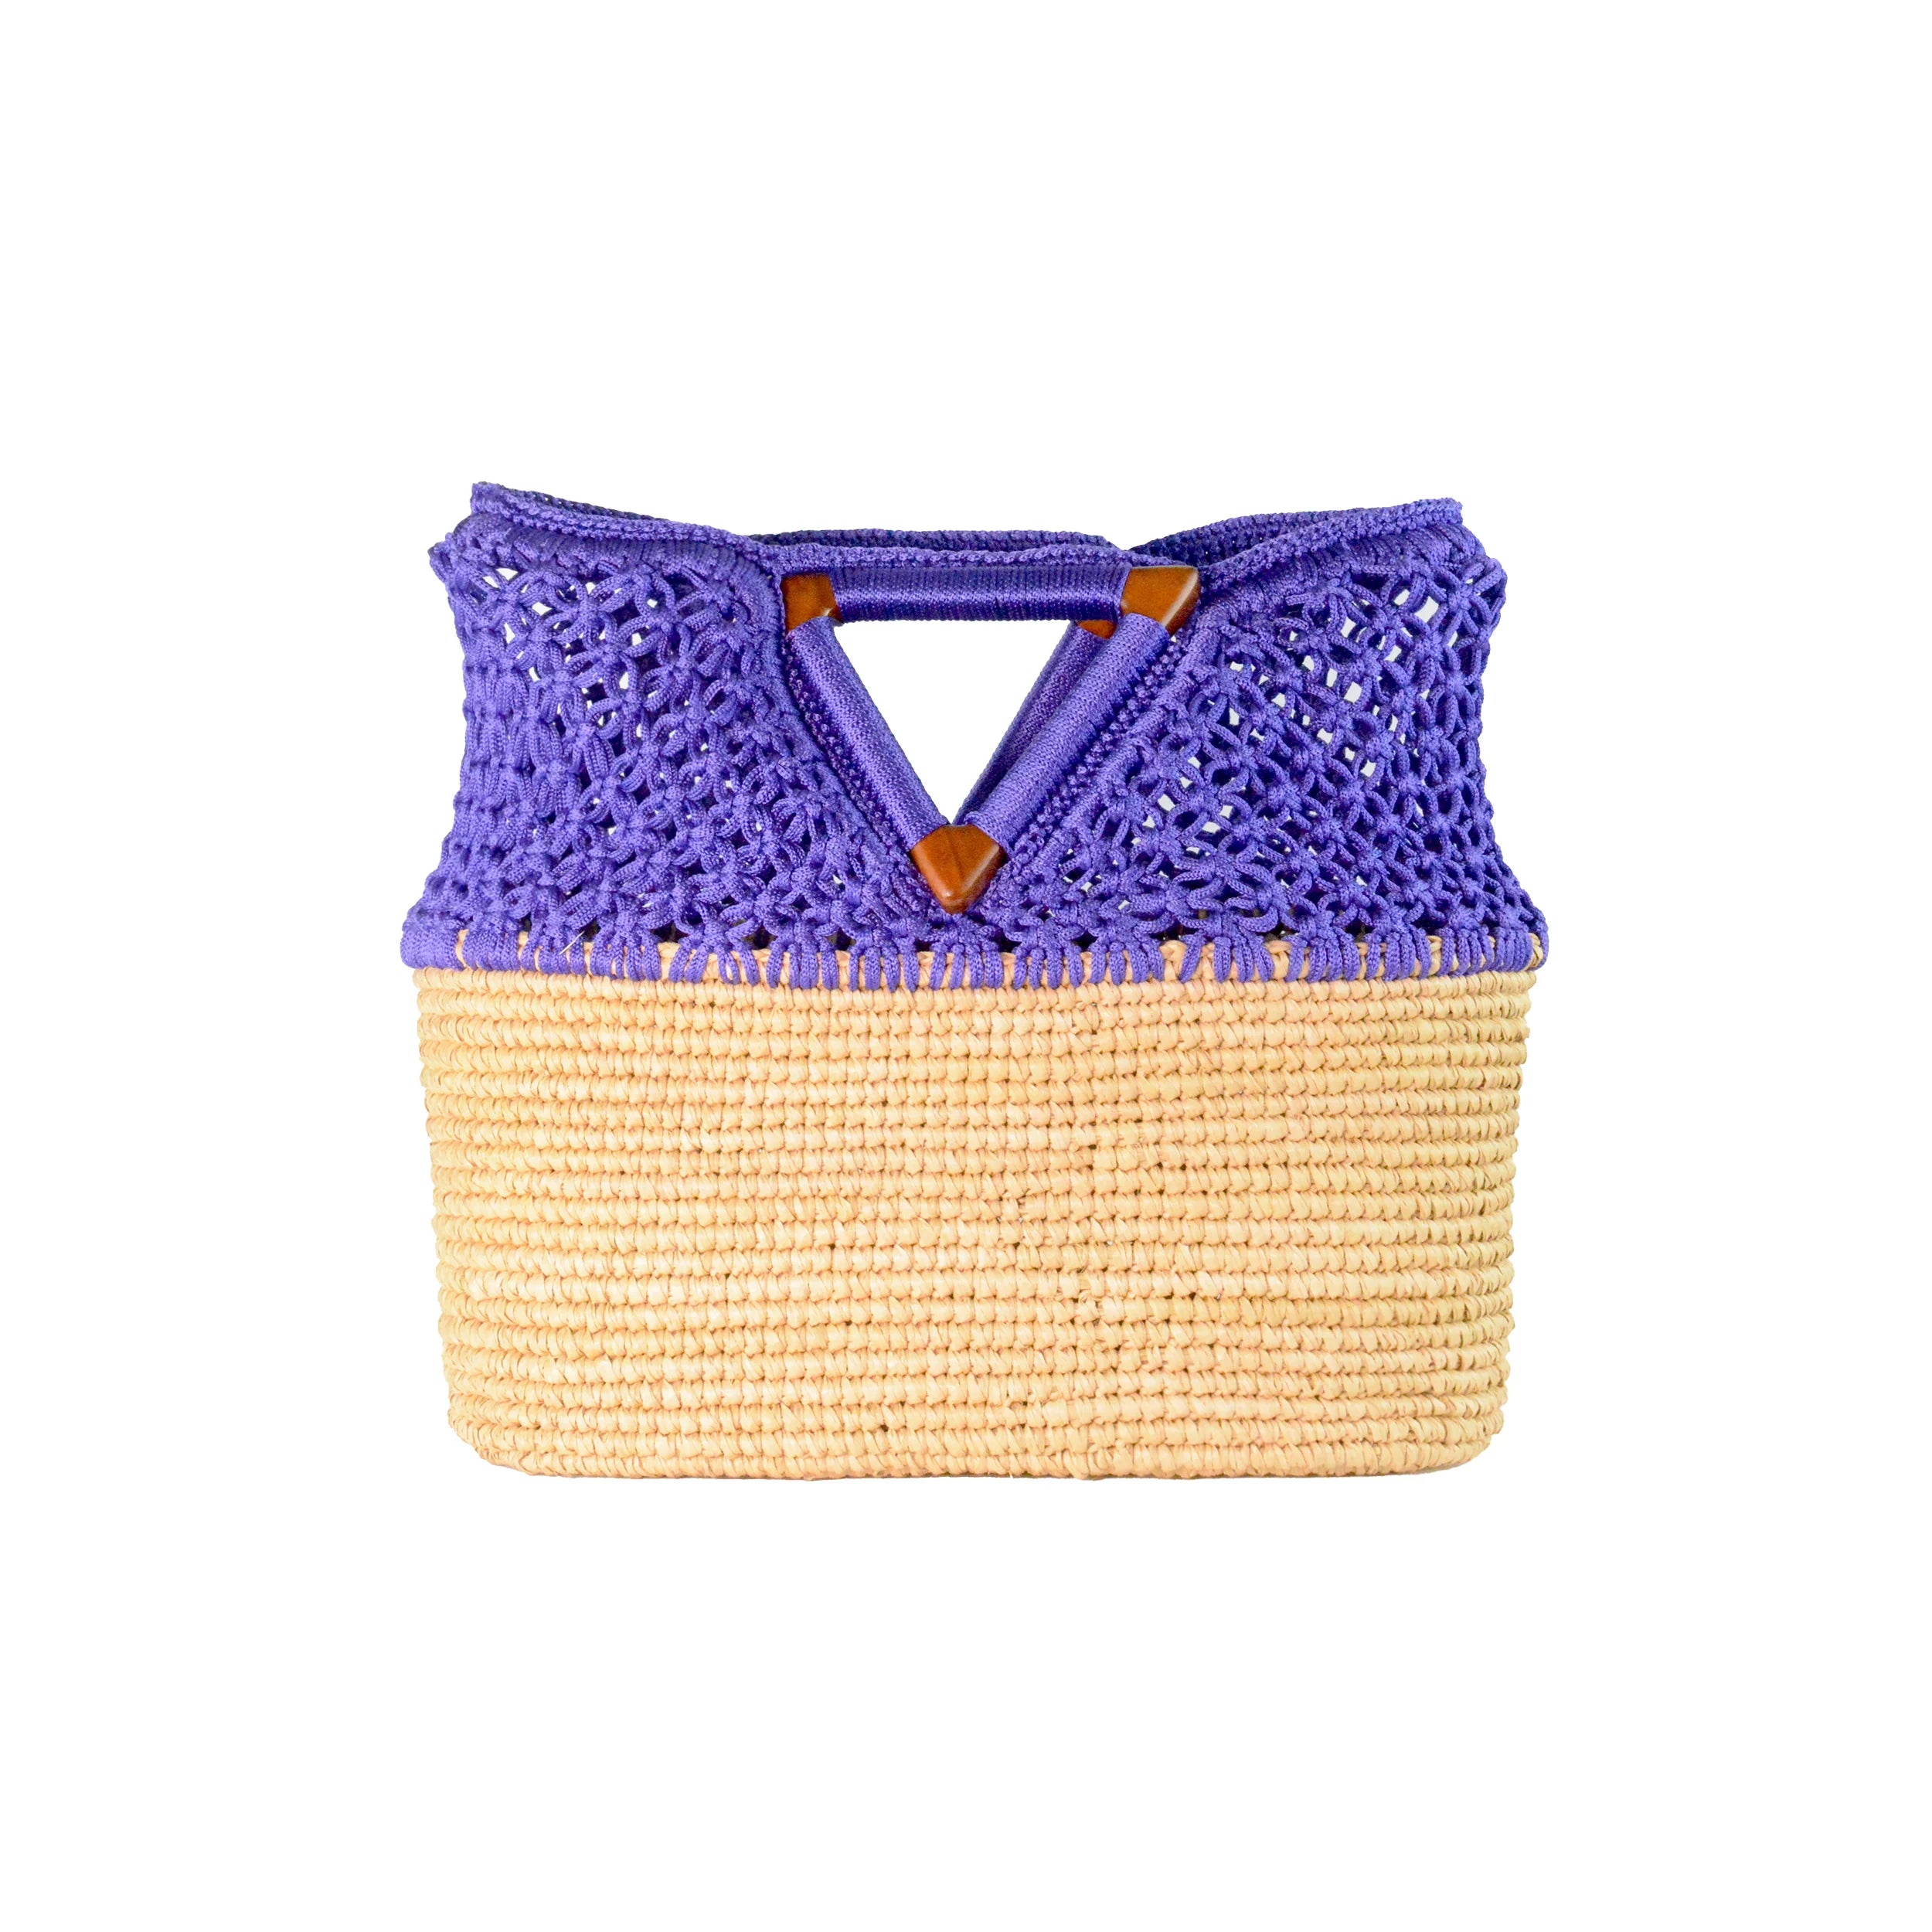 Netted Beach Basket in Purple - Lucette Collection